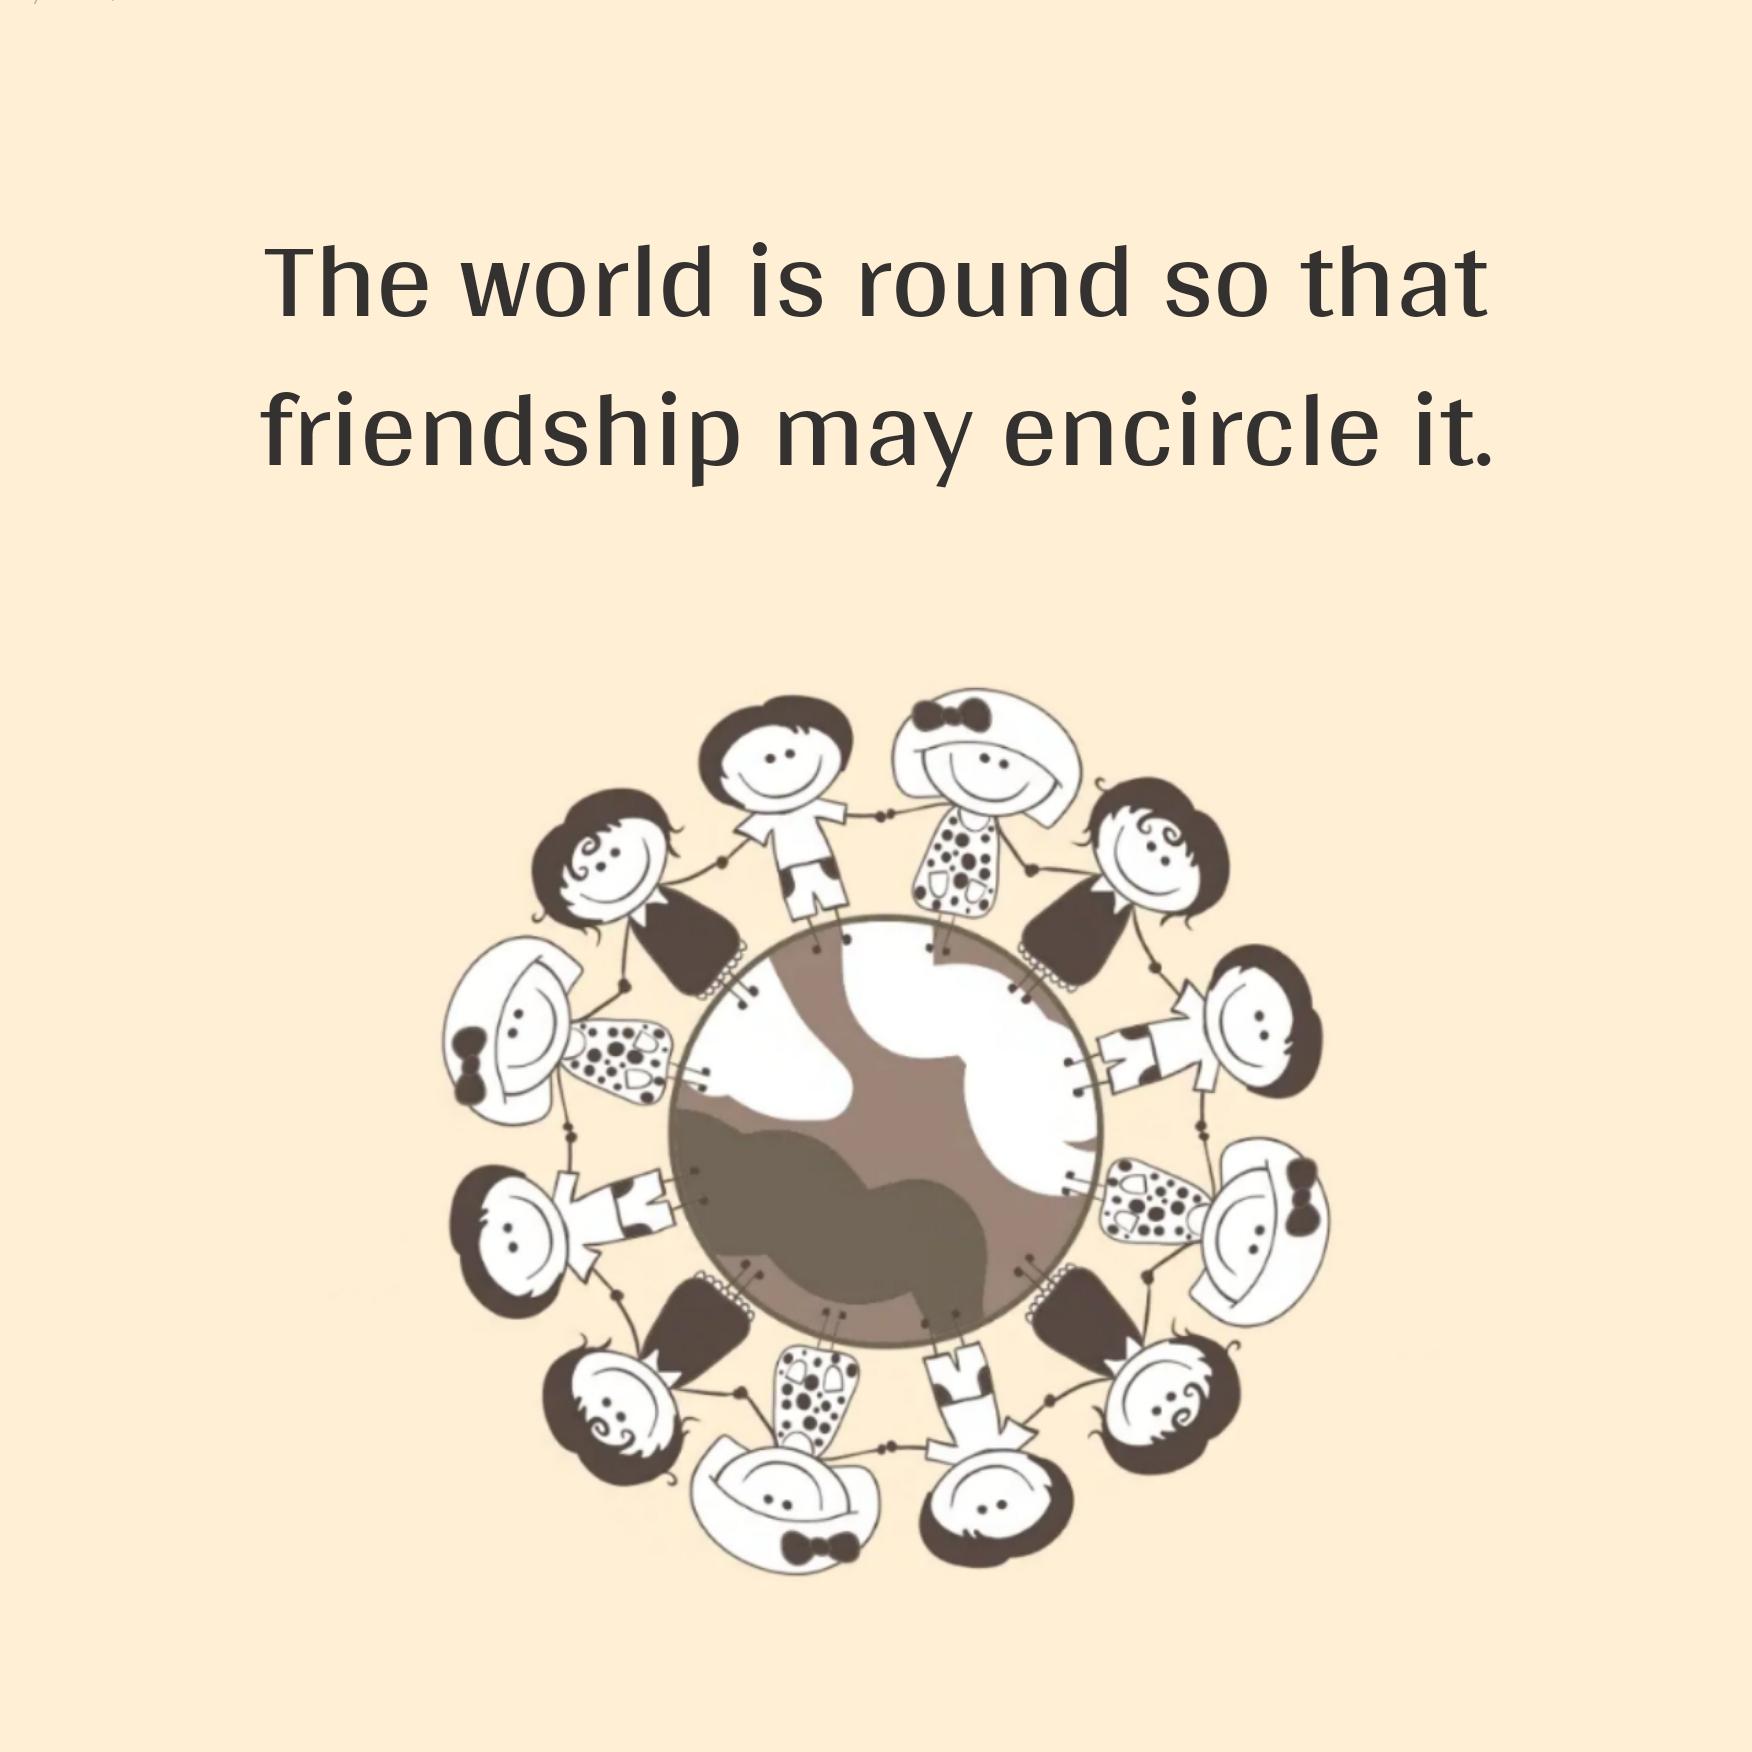 The world is round so that friendship may encircle it